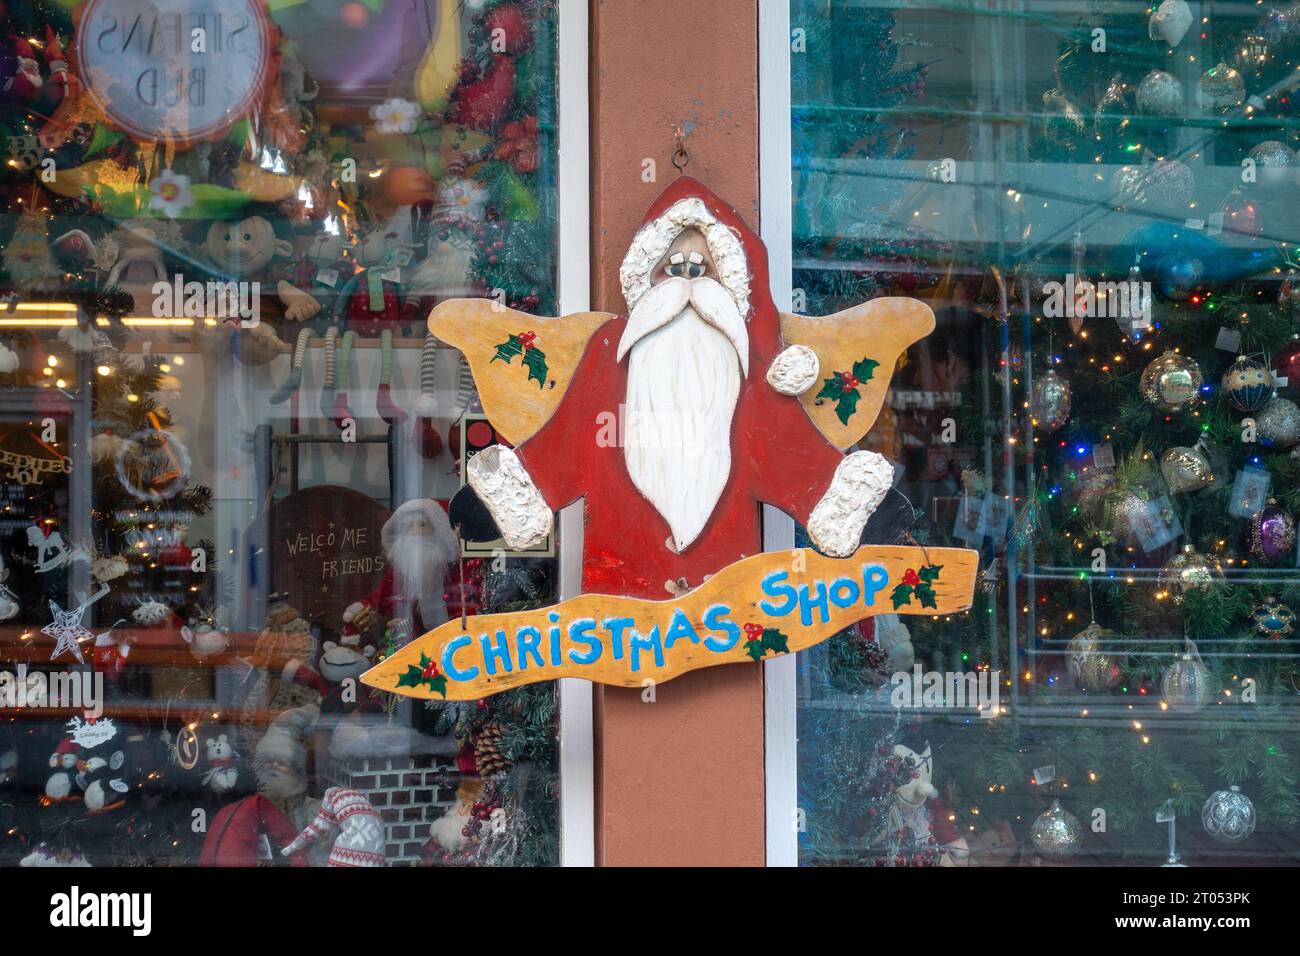 Christmas Shop Window In Reykjavik Iceland Called The Little Christams Shop, Retail Xmas Store In Downtown Reykjavik Tourist Shop Stock Photo